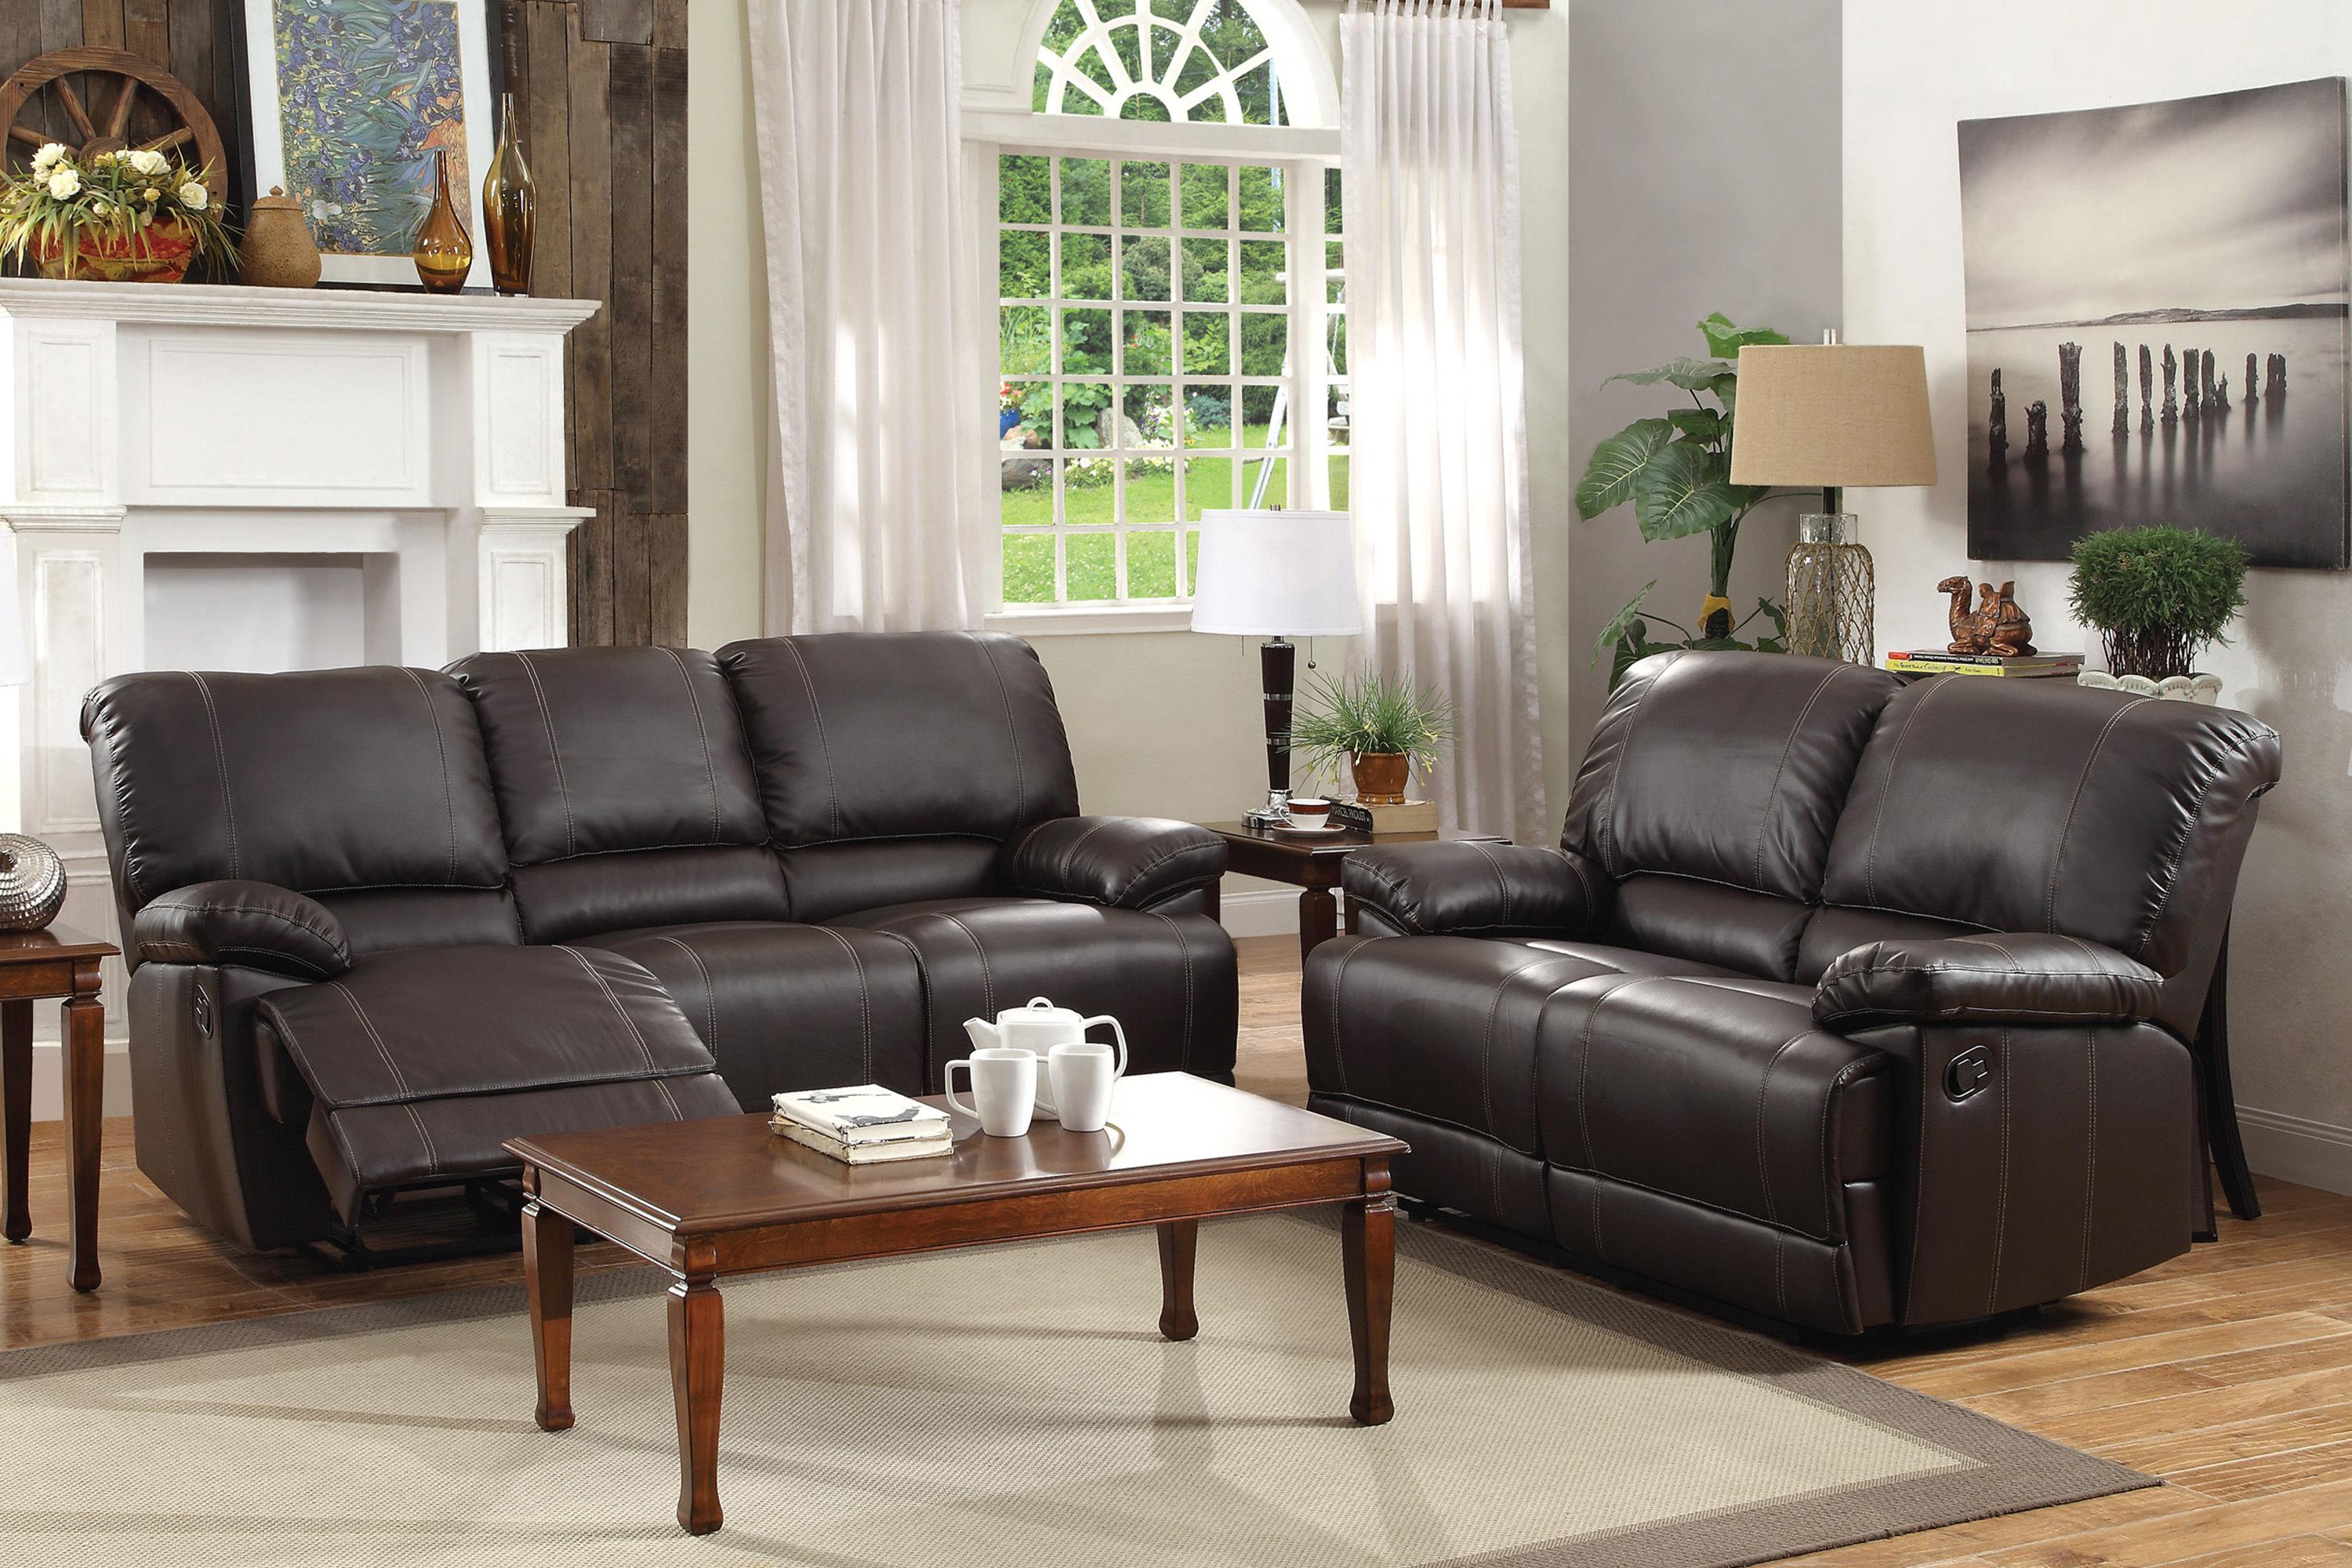 Transitional Reclining Living Room Set Cassville Reclining Living Room Set 2PCS 8403-3-S-2PCS 8403-3-S-2PCS in Brown Faux Leather